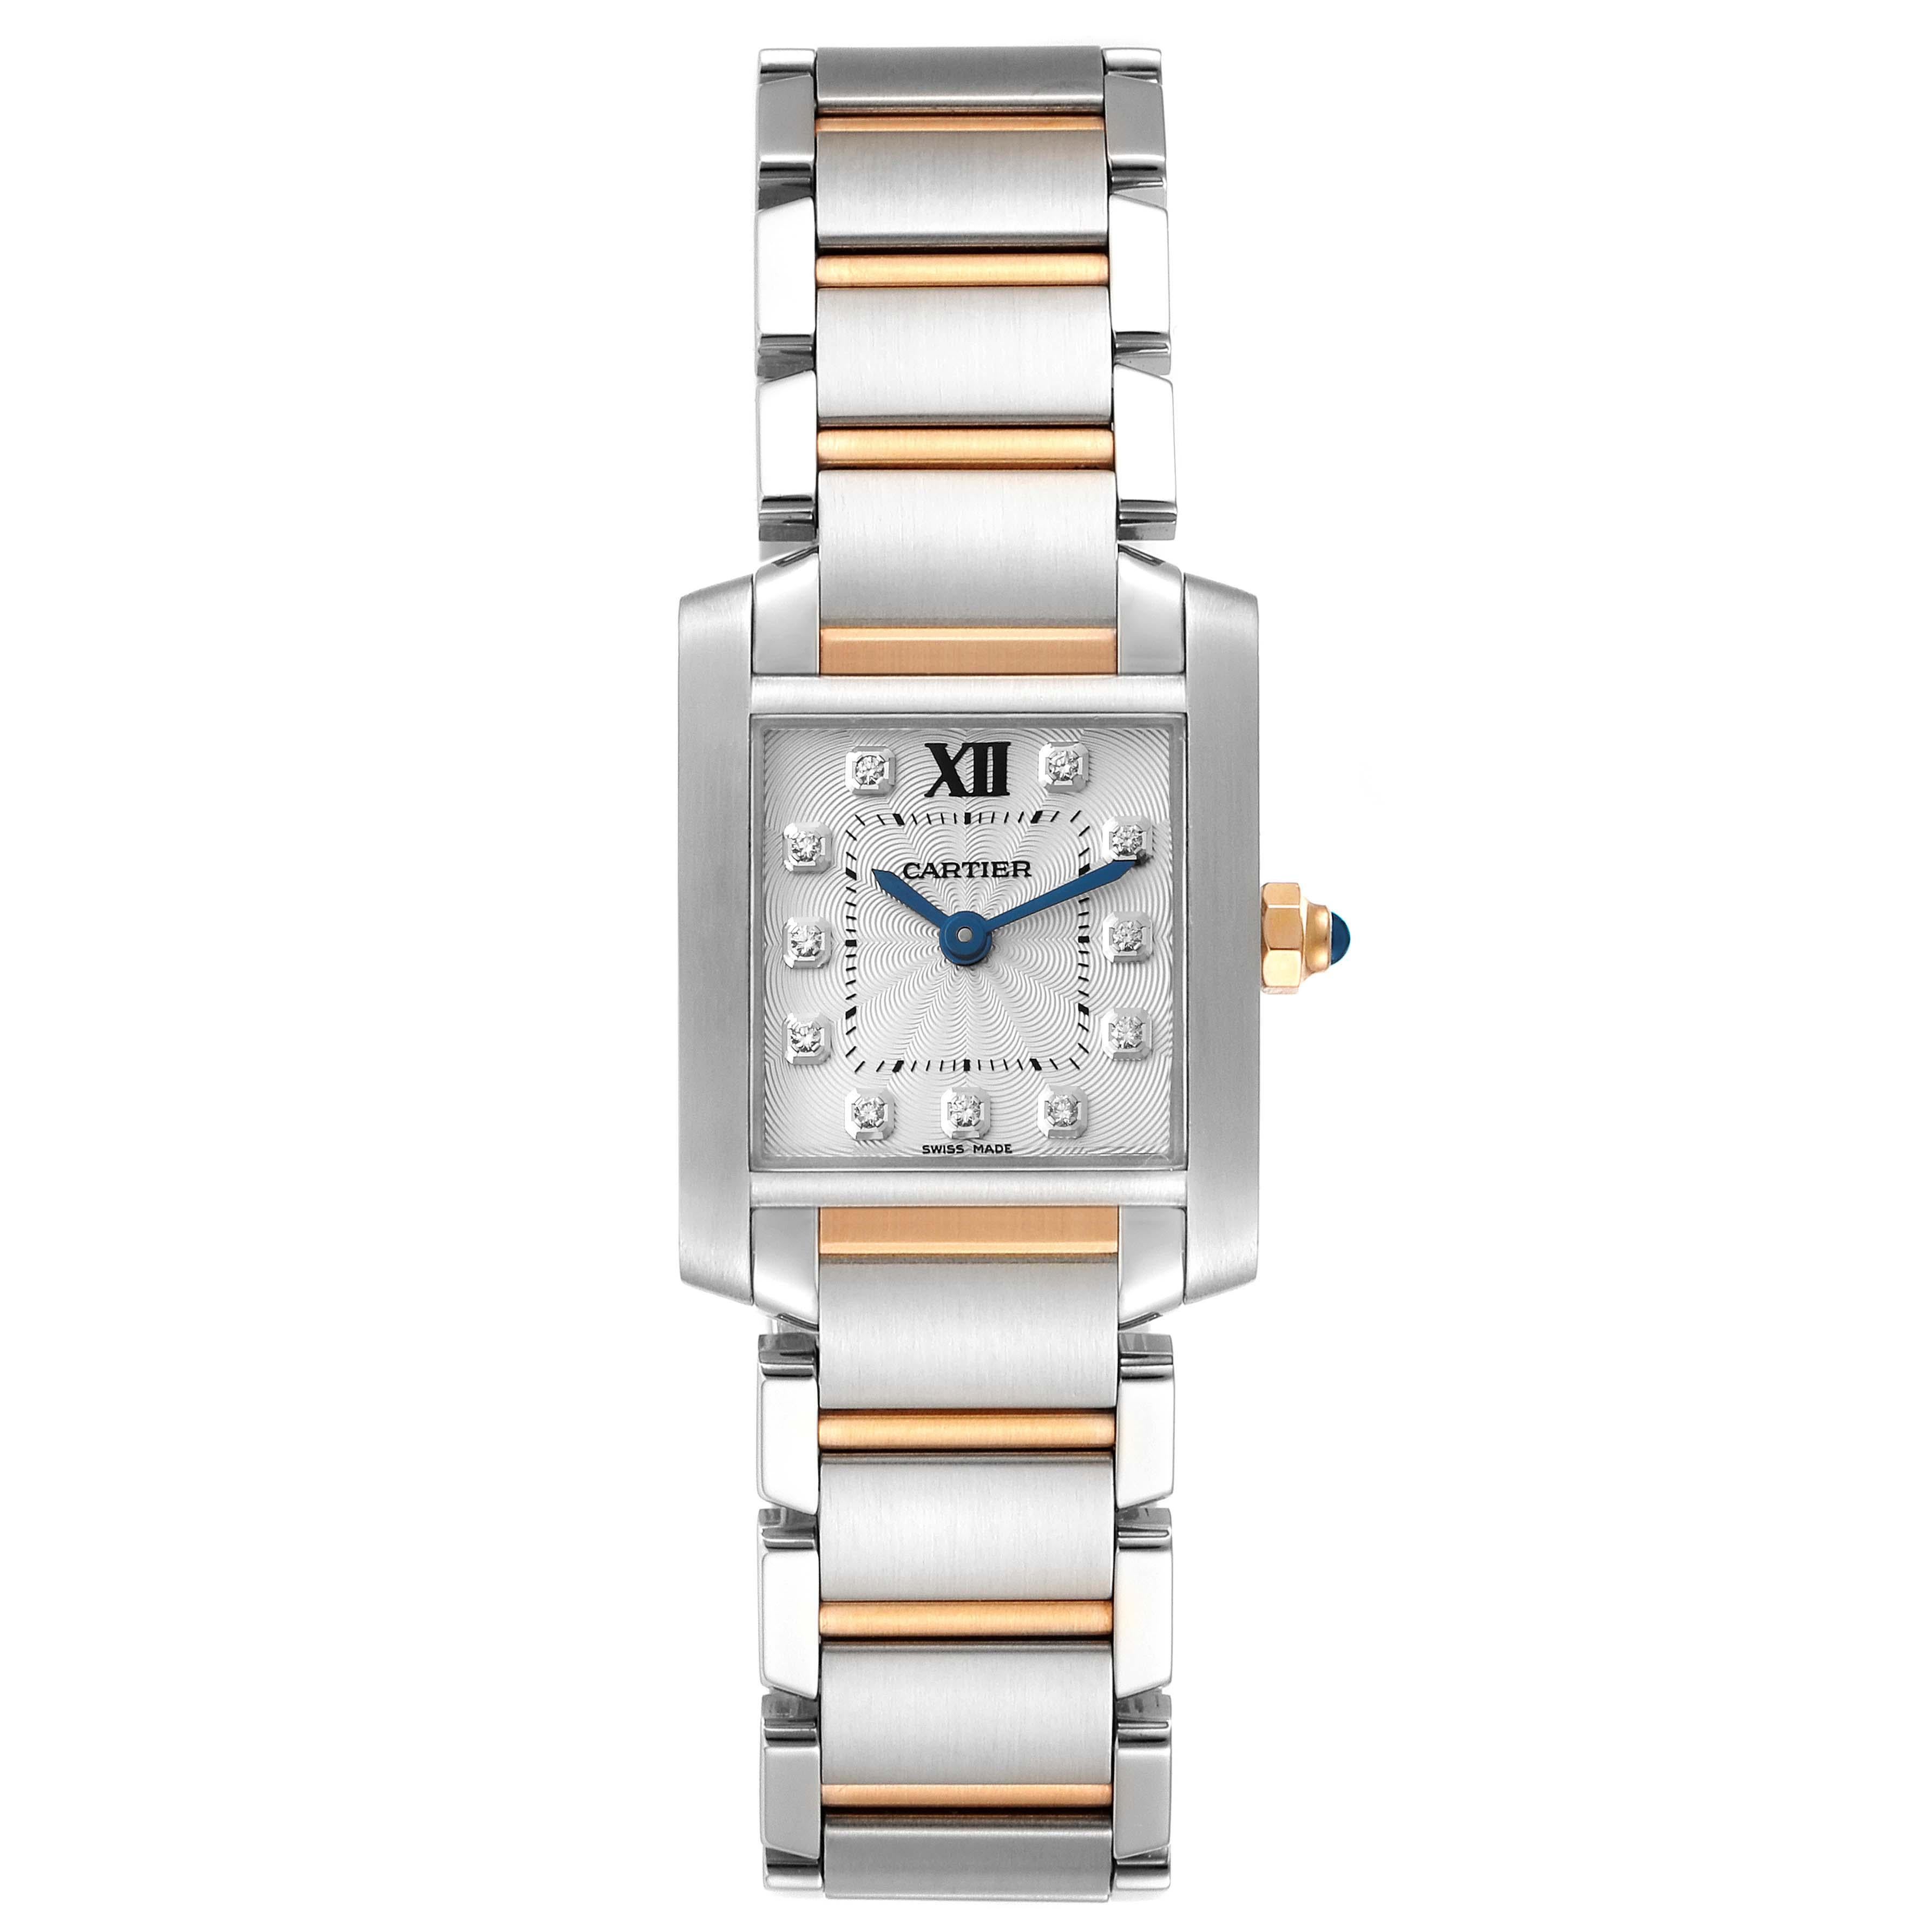 Cartier Tank Francaise Steel Rose Gold Diamond Ladies Watch WE110004. Quartz movement. Stainless steel and rose gold rectangular case 20 mm x 25 mm. Octagonal 18k rose gold crown set with a blue spinel cabochon. . Scratch resistant sapphire crystal.